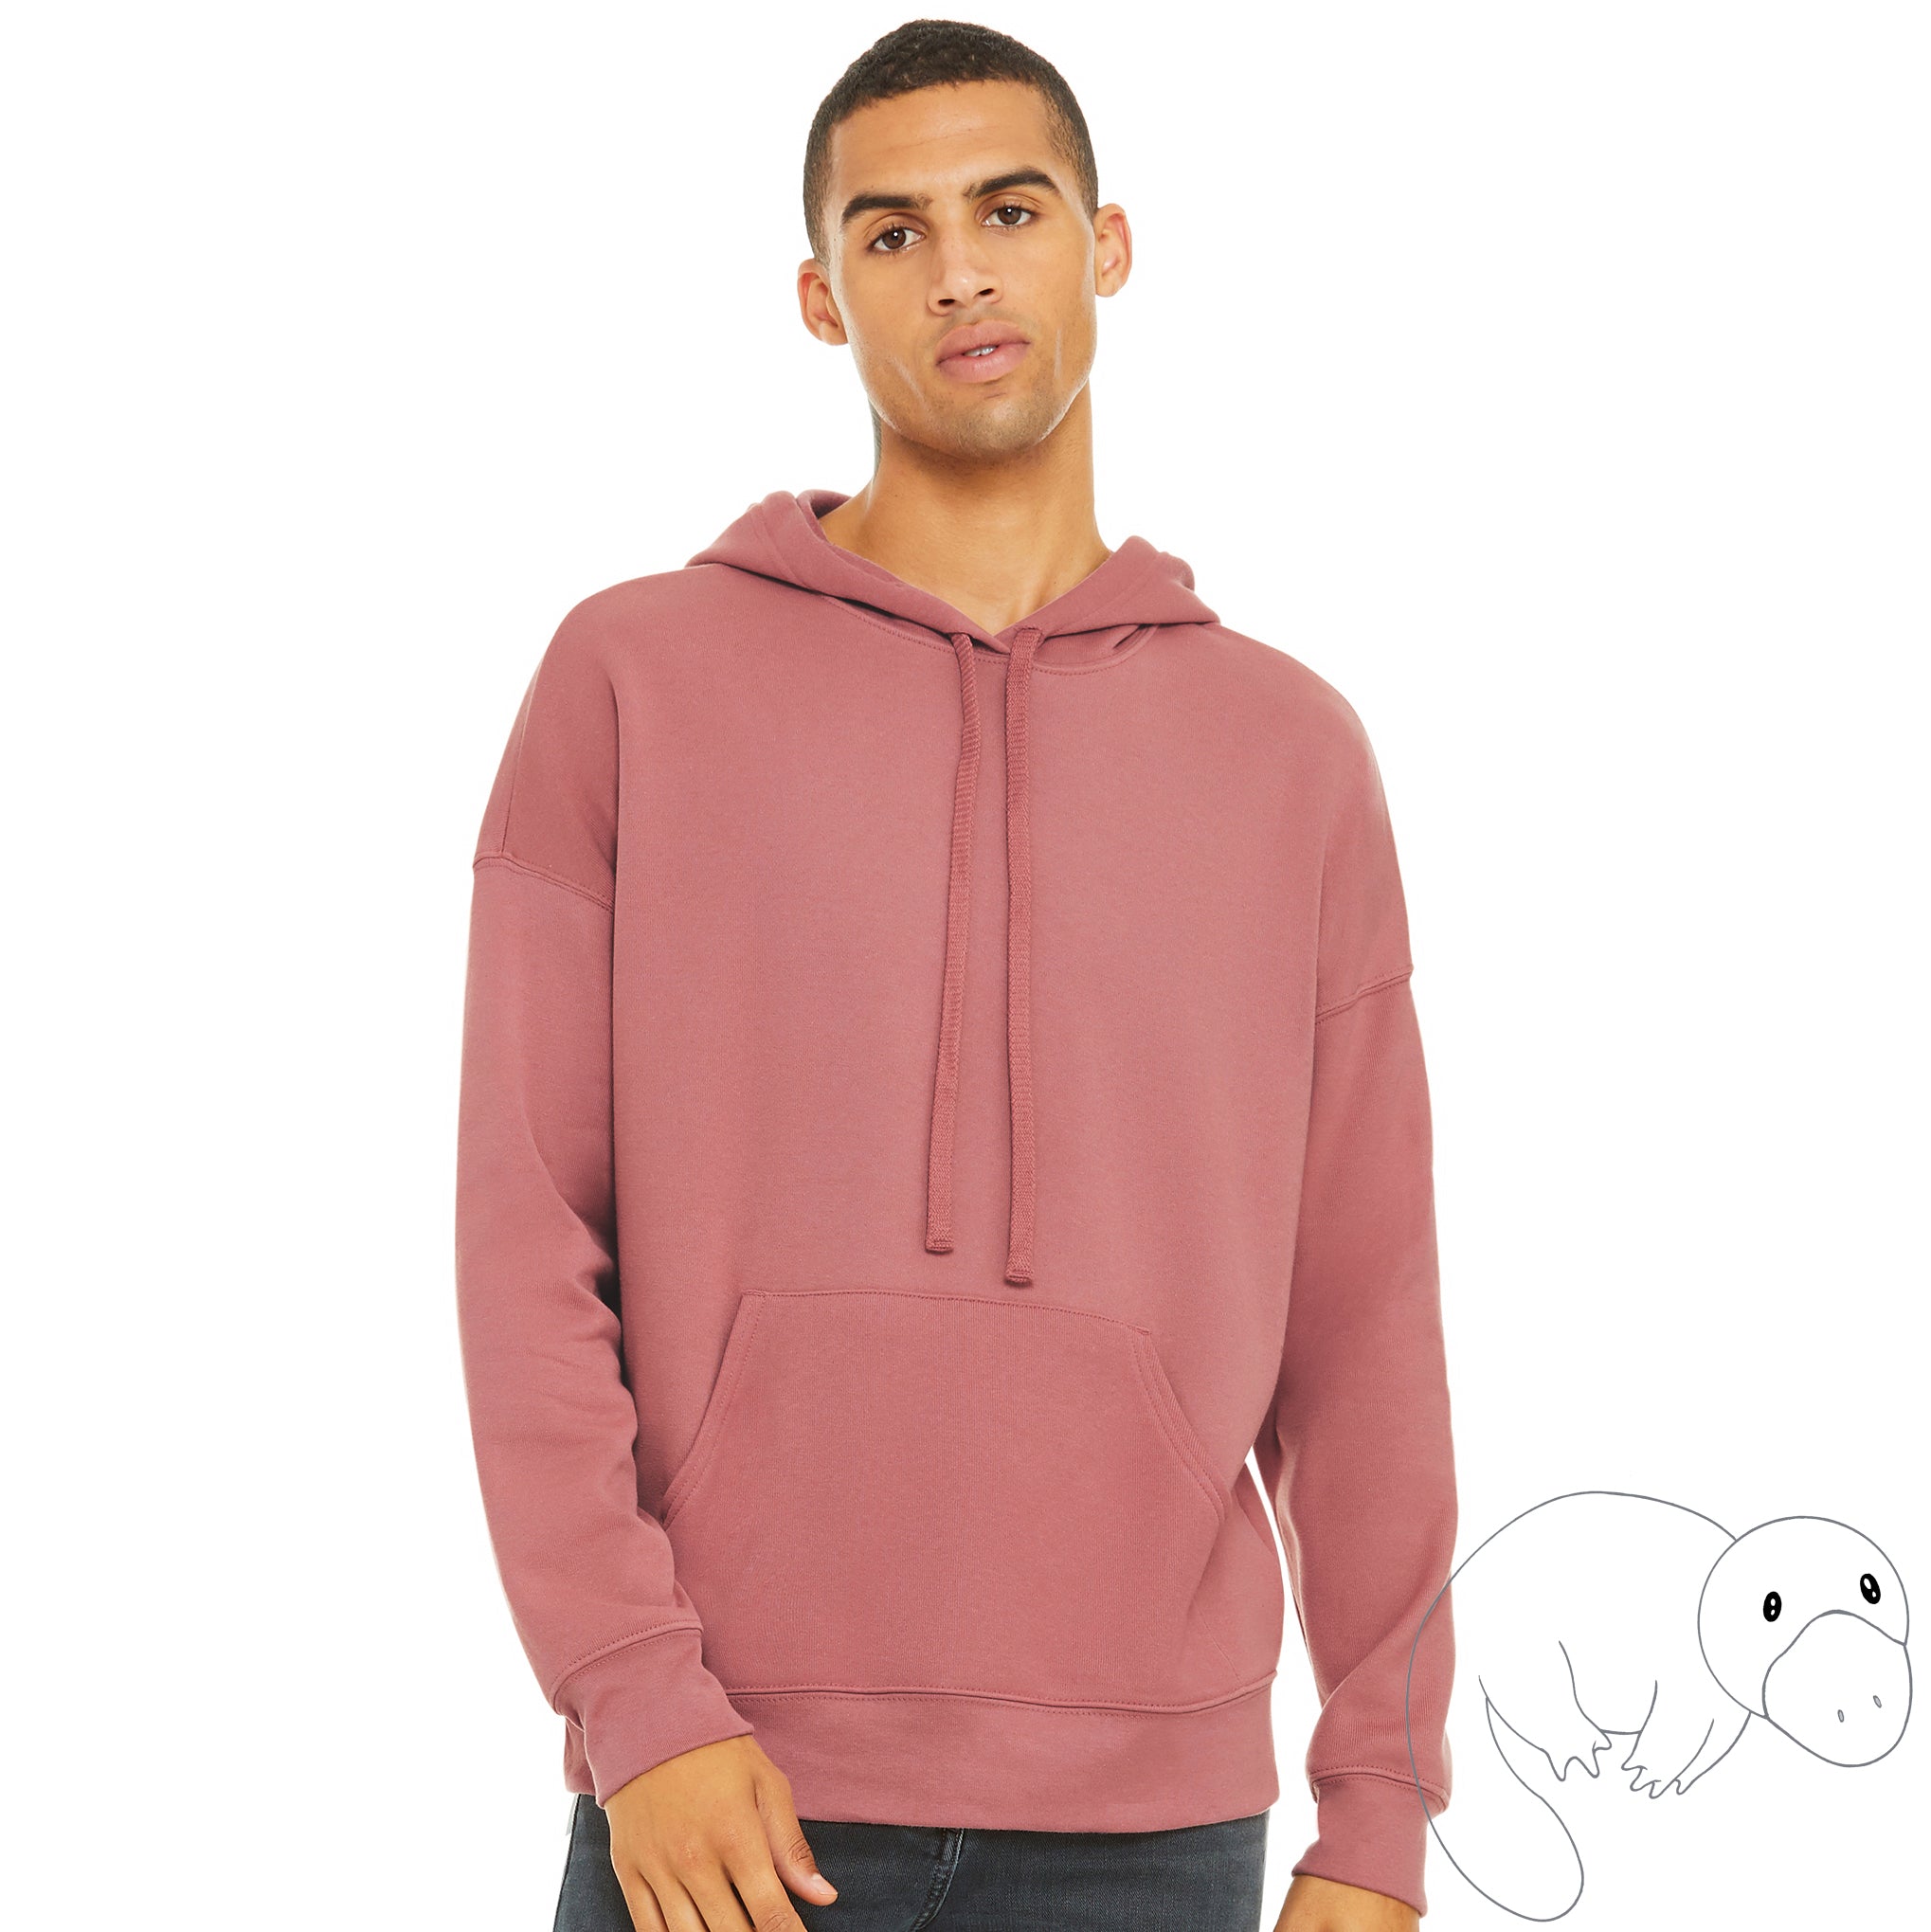 new-product-soft-sweatshirt-cozy-warm-dark-pink-dessert-coral-rose-mauve-hoodie-face-mask-Plats-Hoodie-facemask-all-in-one-convertible-plats-hoodie-platinum-platypus-guy-millennial-boy-man-beautiful-eyes-blue-green-young-cute